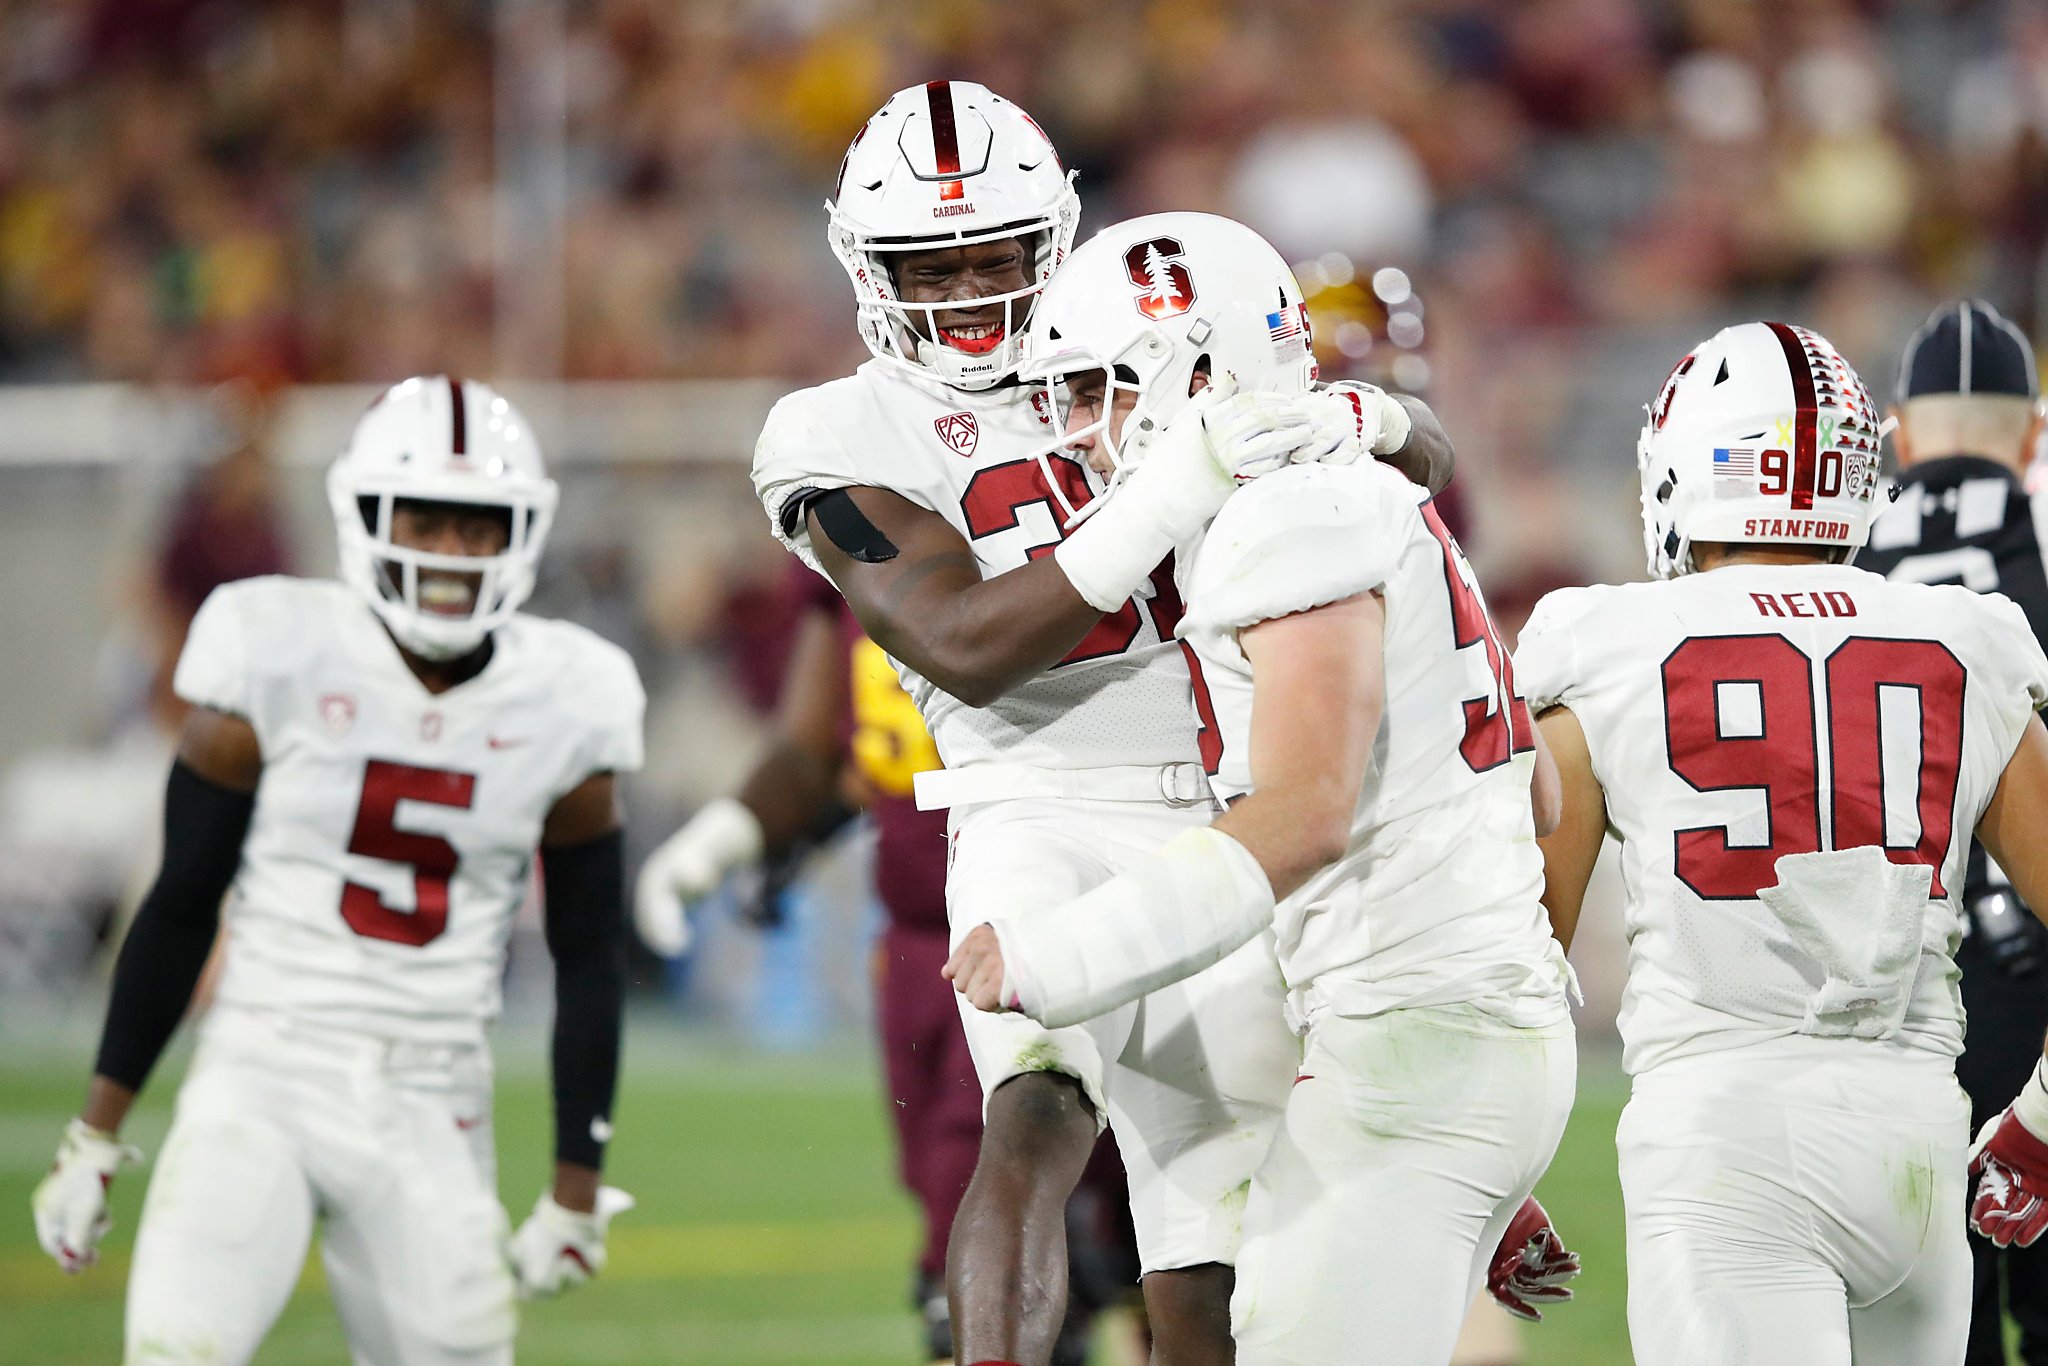 Stanford back in AP Top 25 college football poll